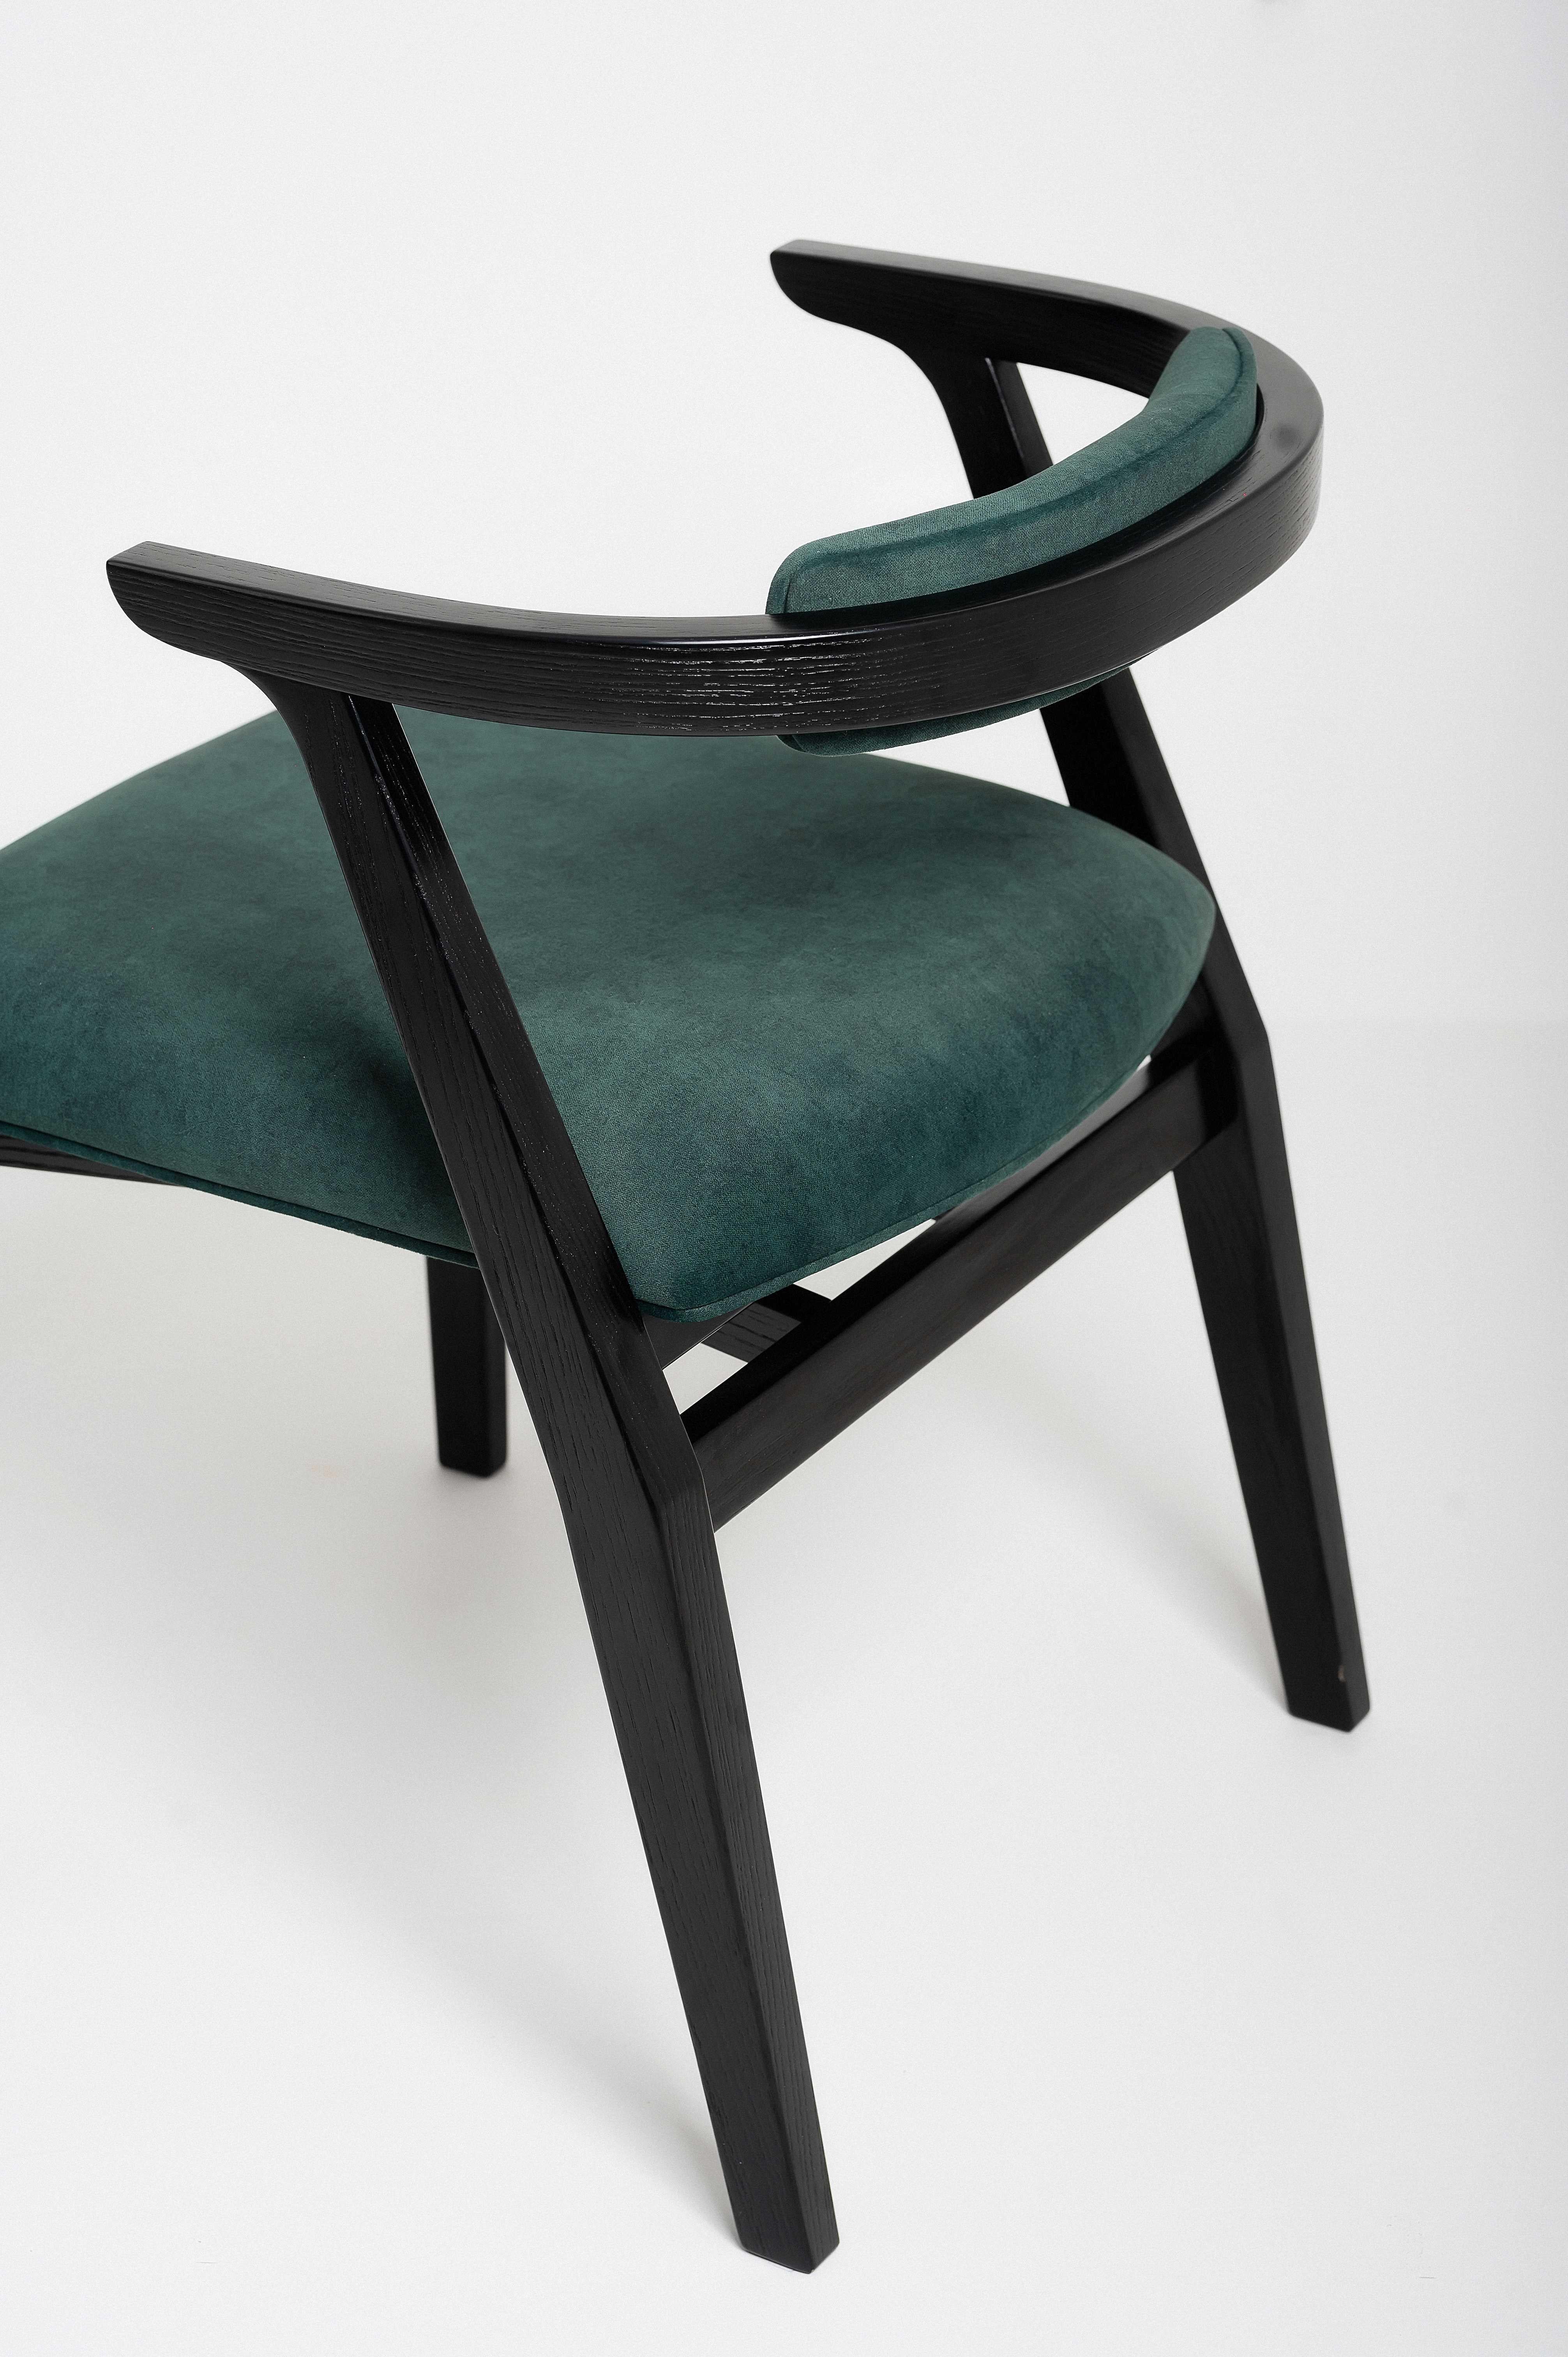 Modern Dining Room Chairs in Black Solid Wood and Emerald Material In New Condition For Sale In Naperville, IL